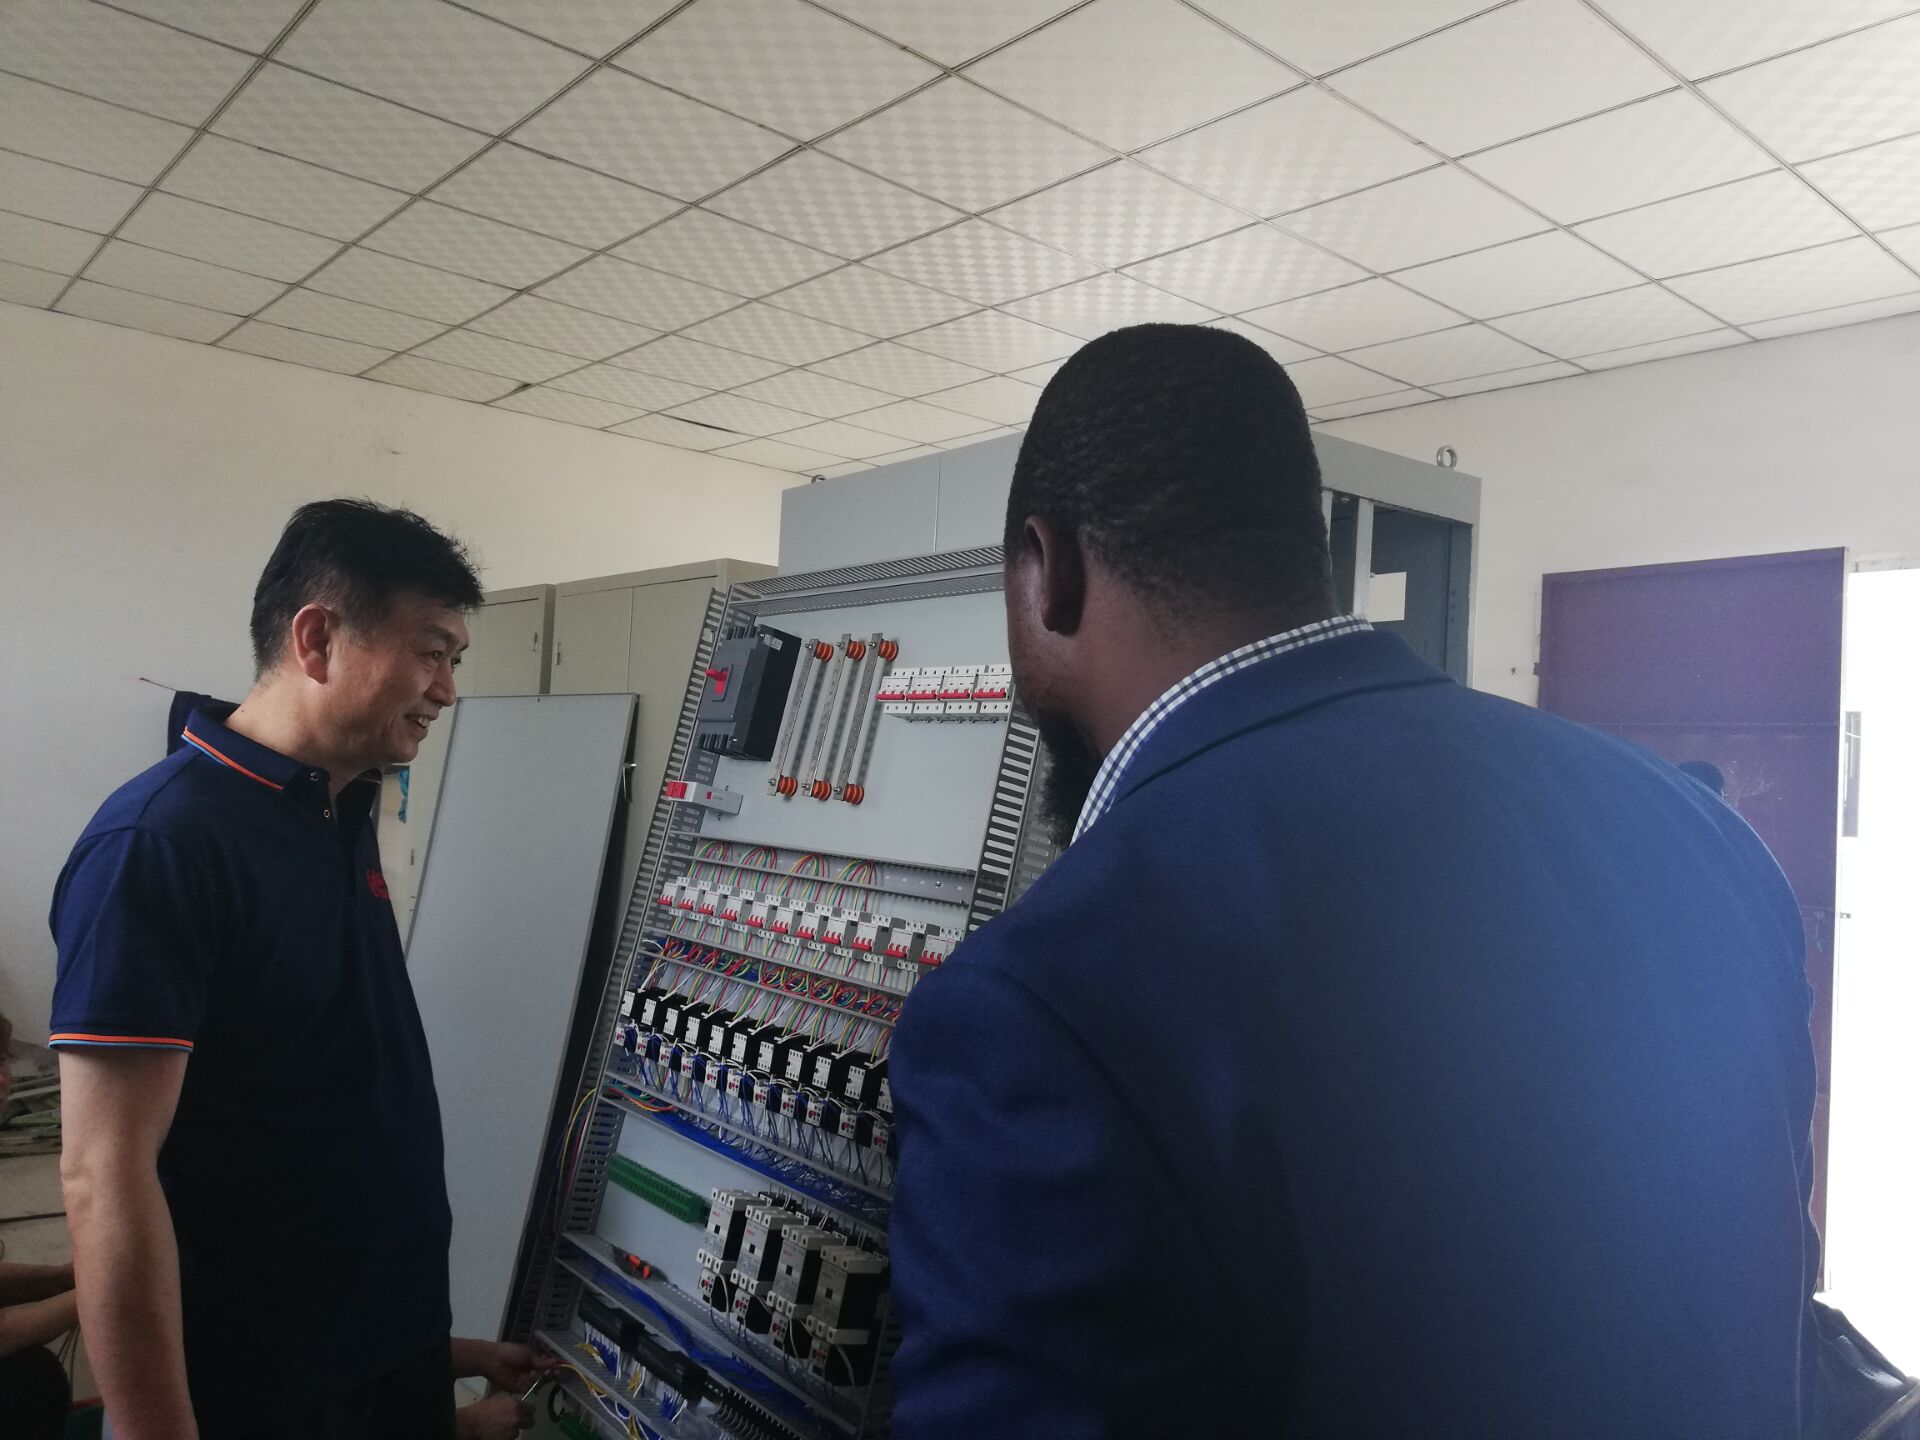 This week our Ethiopia client comes to our factory to see the running machine